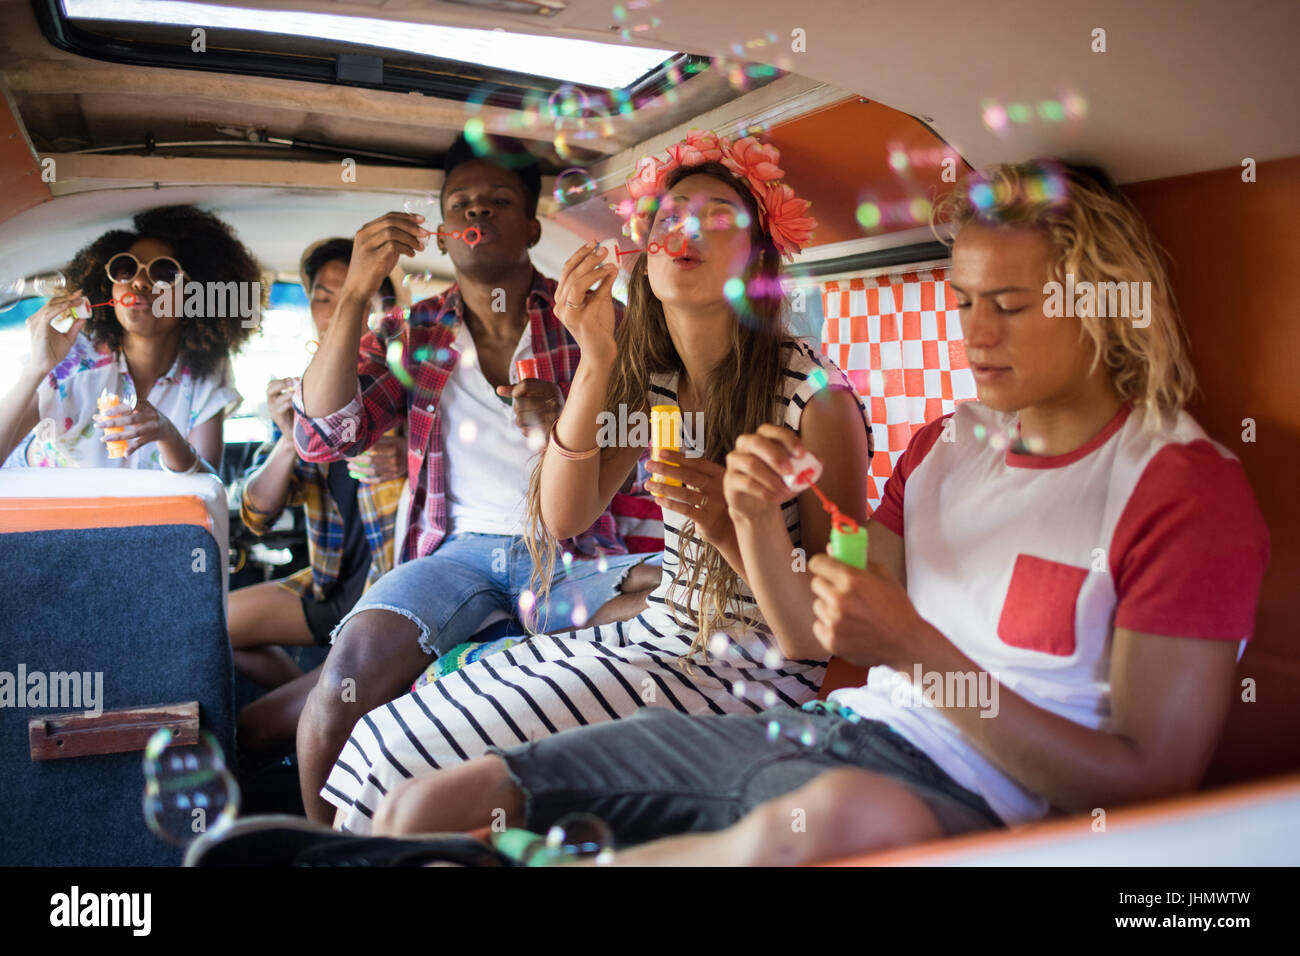 Young friends blowing bubble wands while sitting in camper van Stock Photo